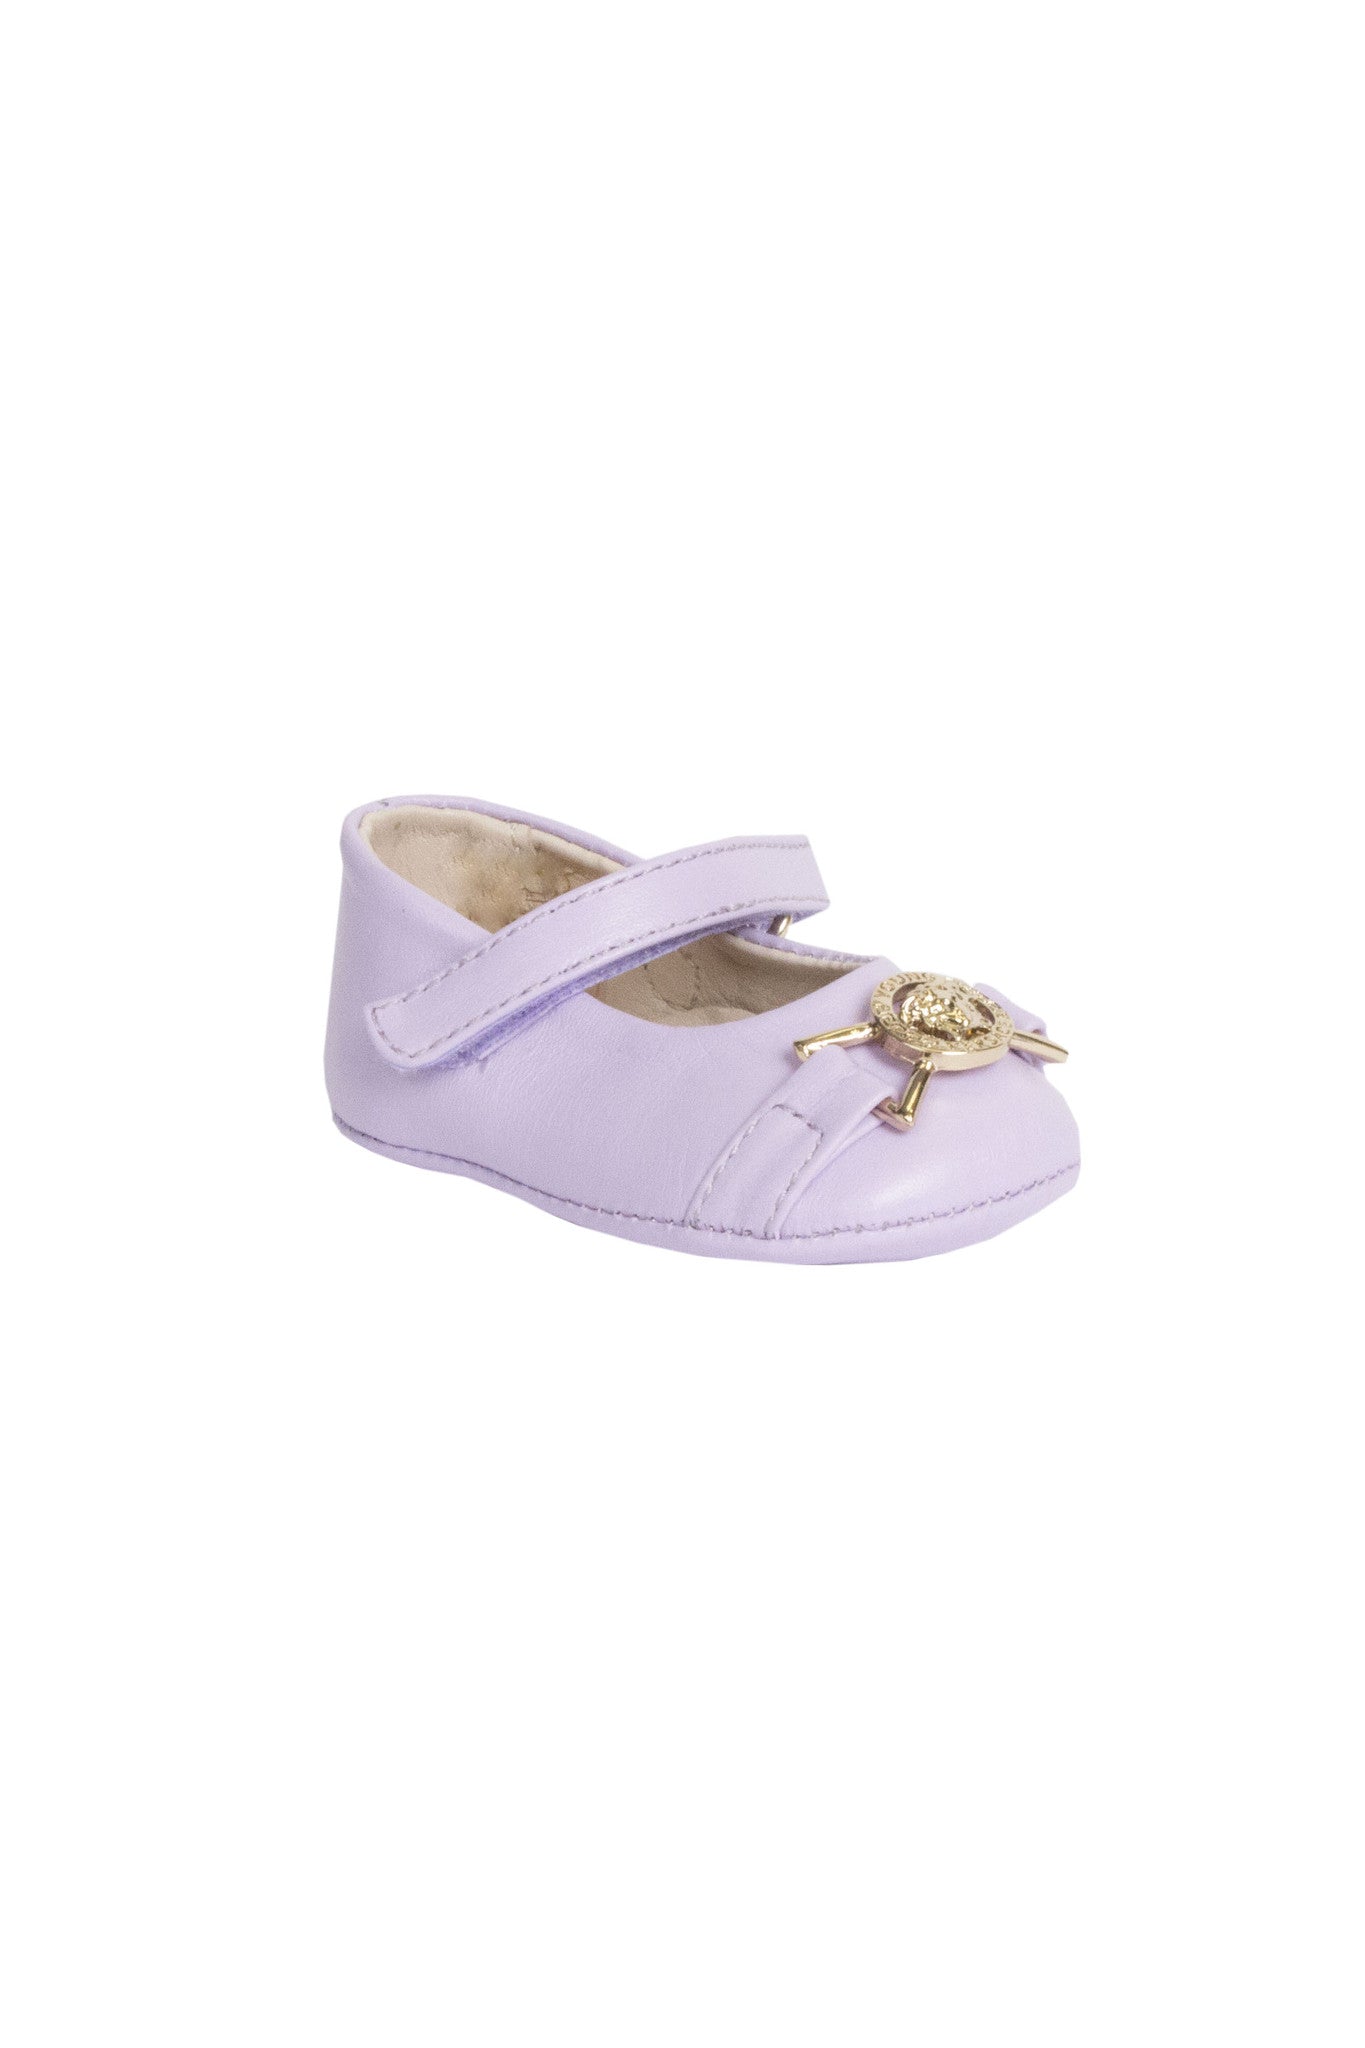 Girls Leather Pre-Walker Shoes-Lilac